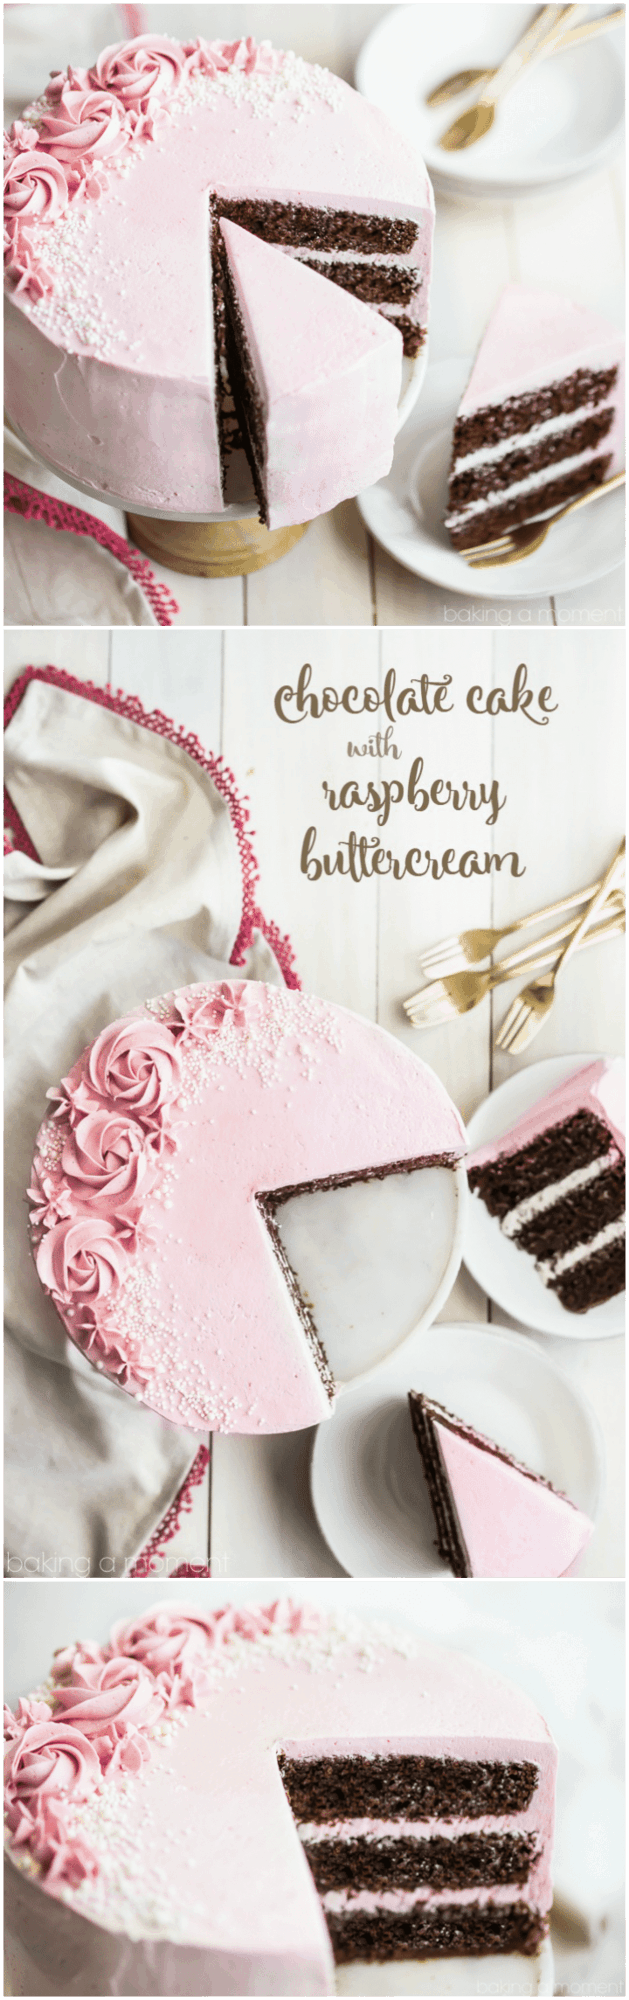 LOVED this moist and fluffy chocolate cake, and the raspberry buttercream was so light and fresh! Perfect party cake :)